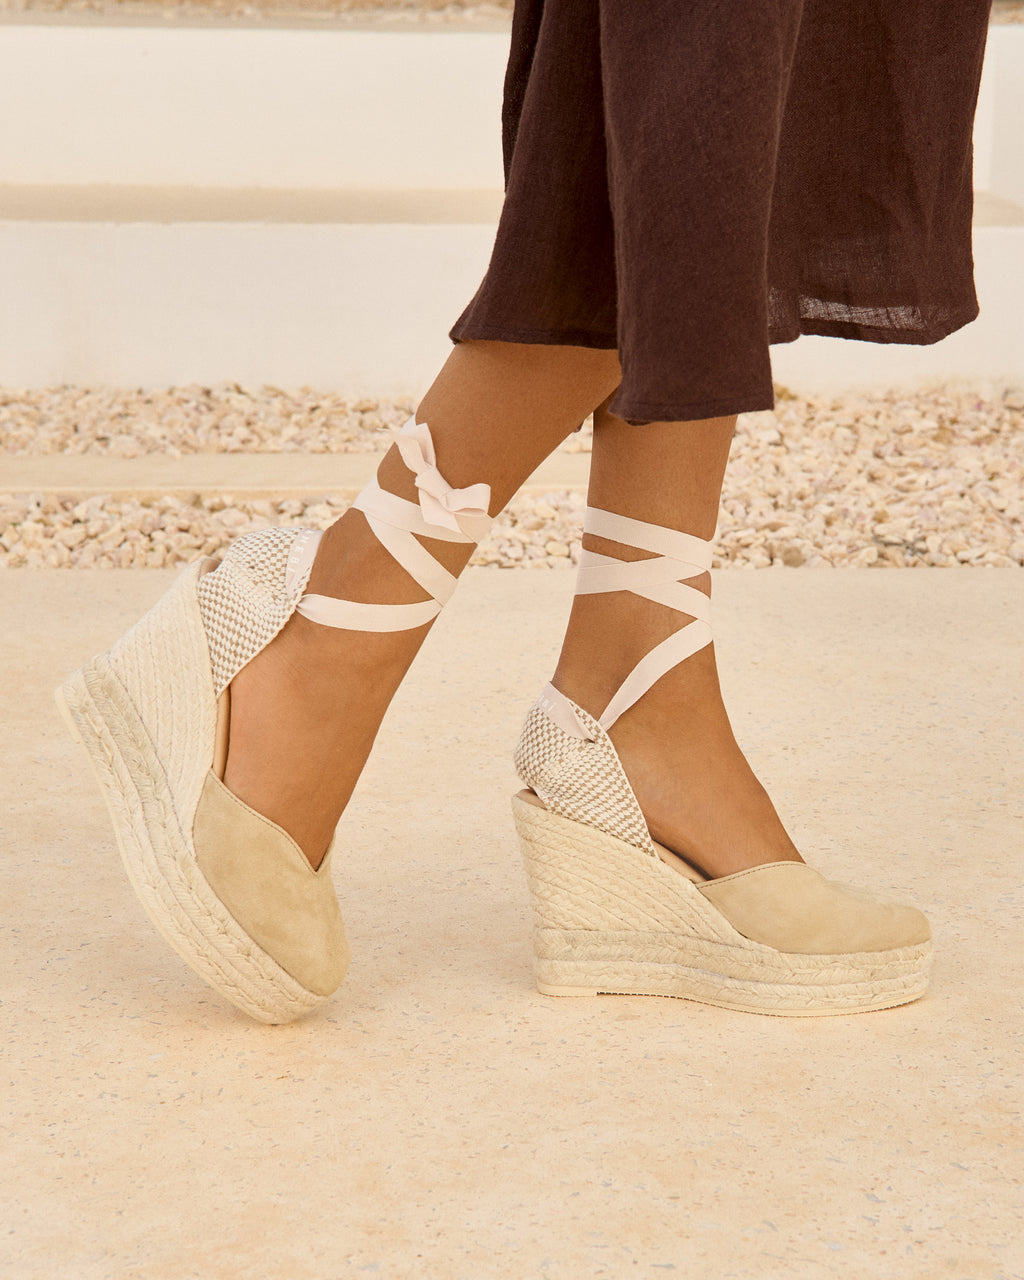 Soft Suede Heart-Shaped|Wedge Espadrilles - Hamptons Champagne Beige